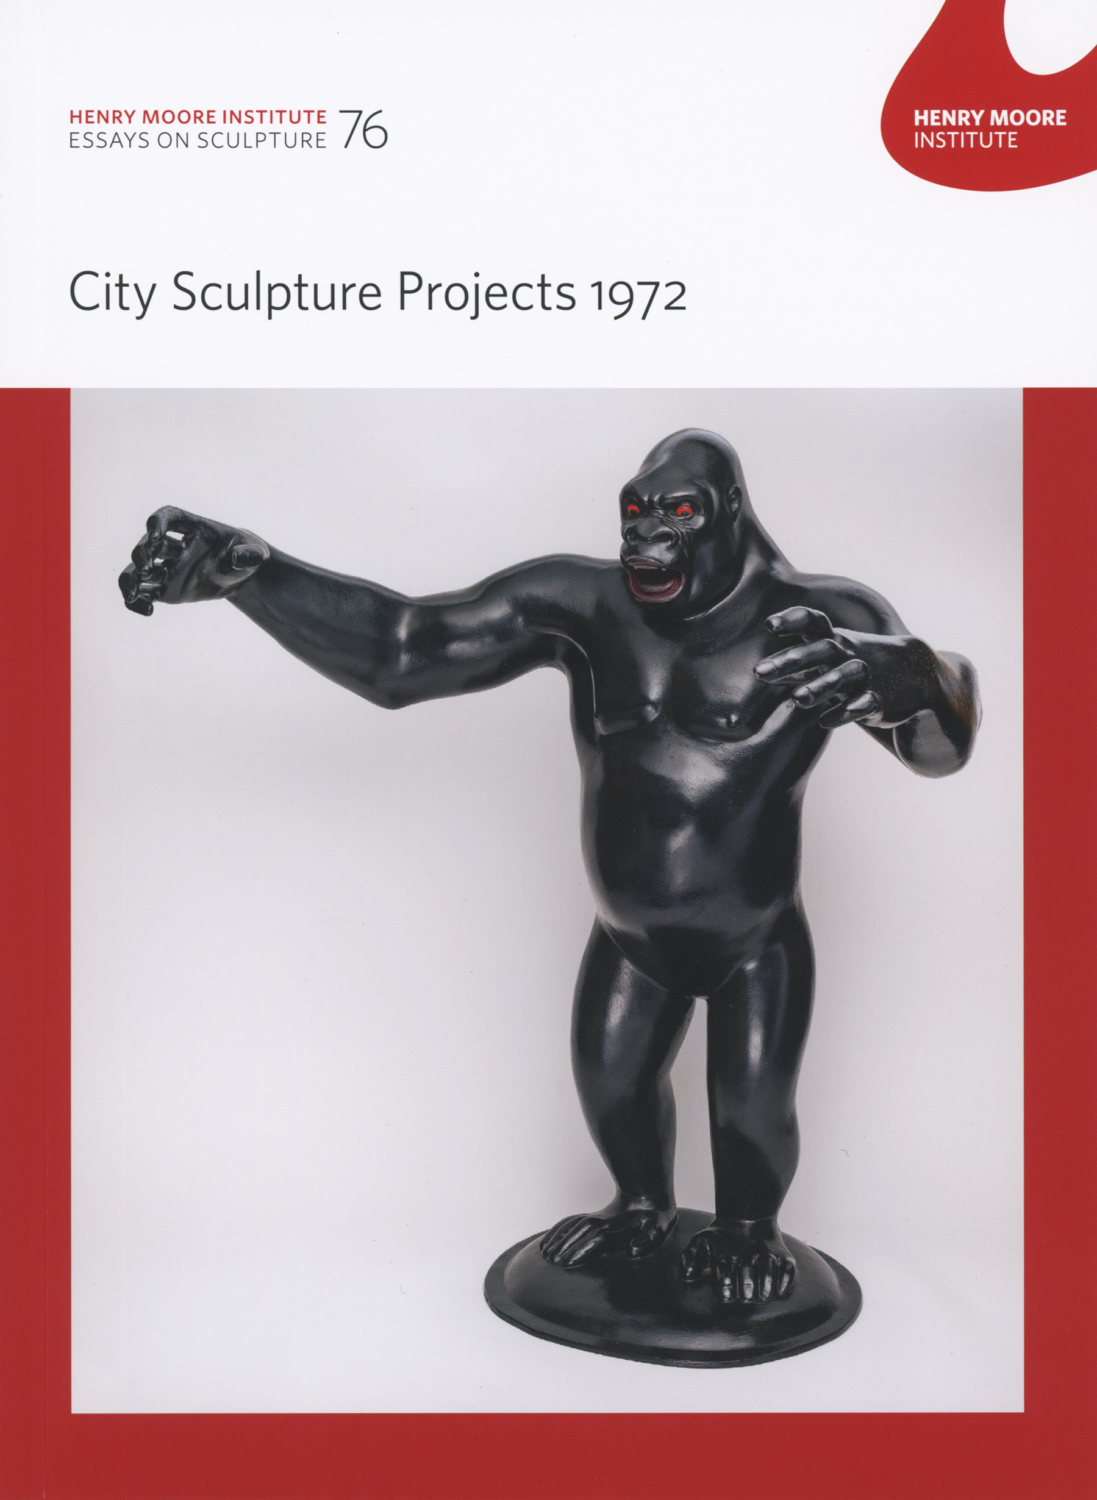 City Sculpture Projects 1972, Henry Moore Institute, Essays on Sculpture 76.